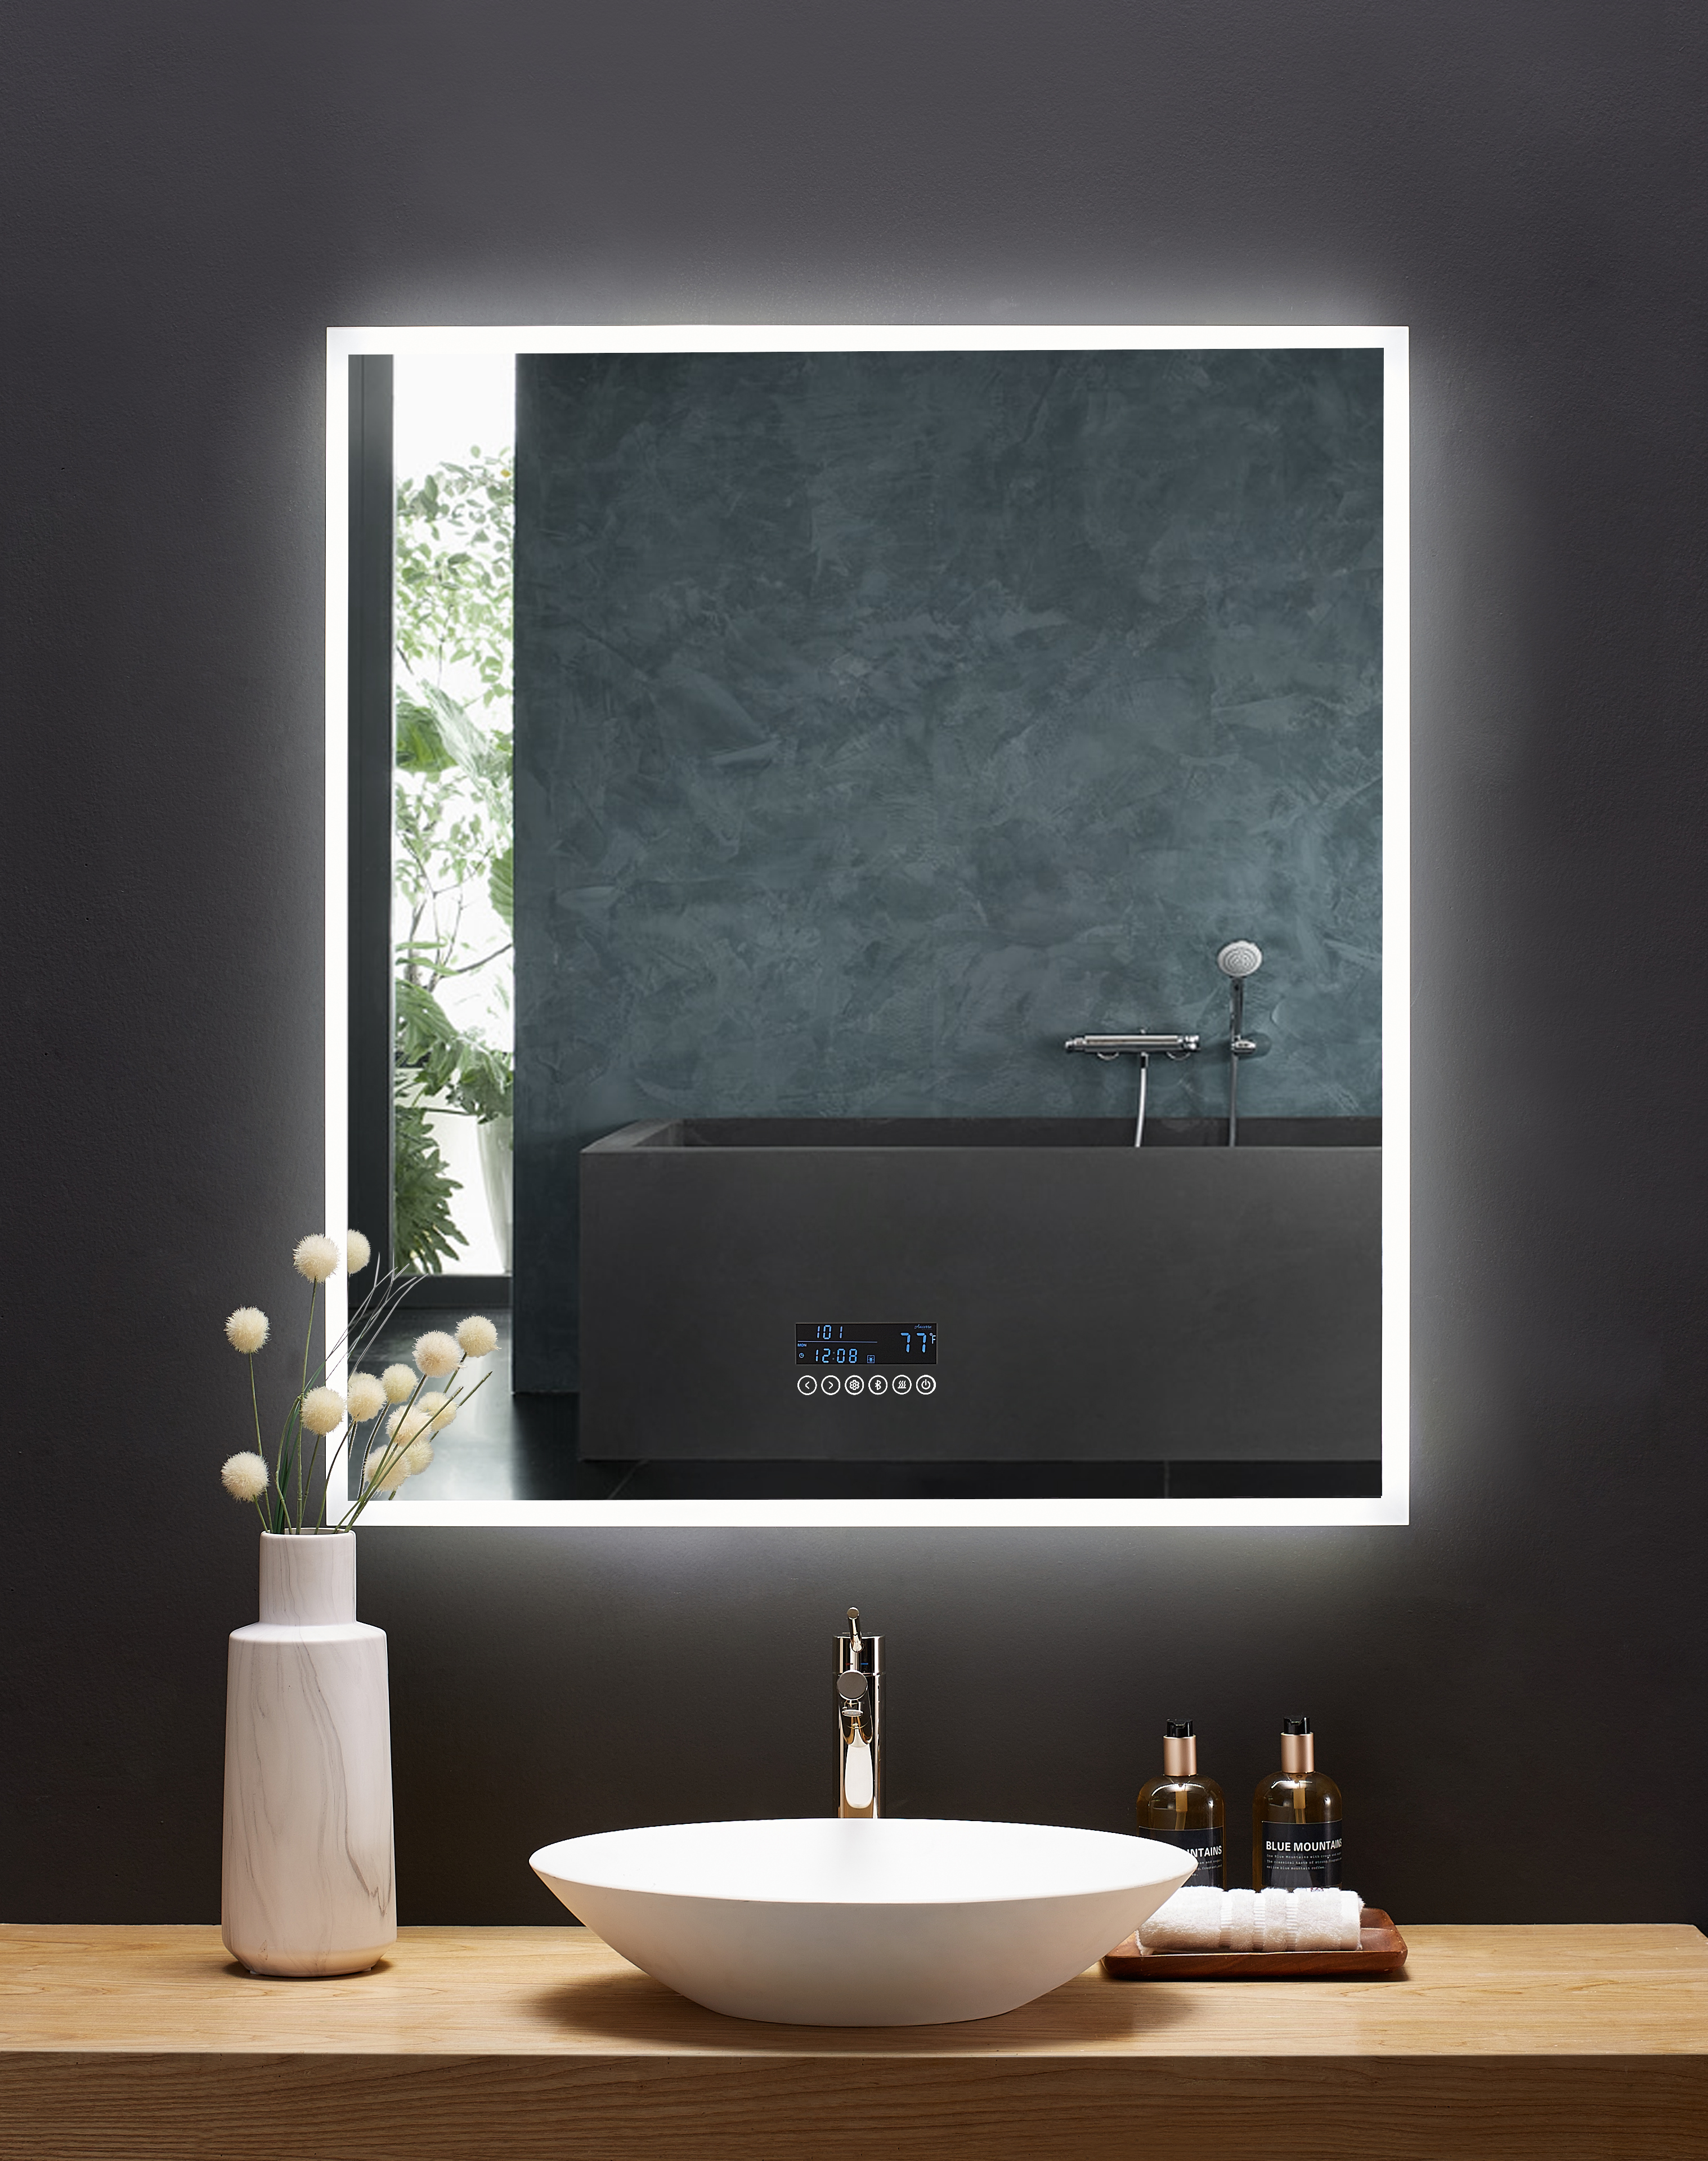 36 in. x 40 in. LED Frameless Mirror with Bluetooth, Defogger  and Digital Display 